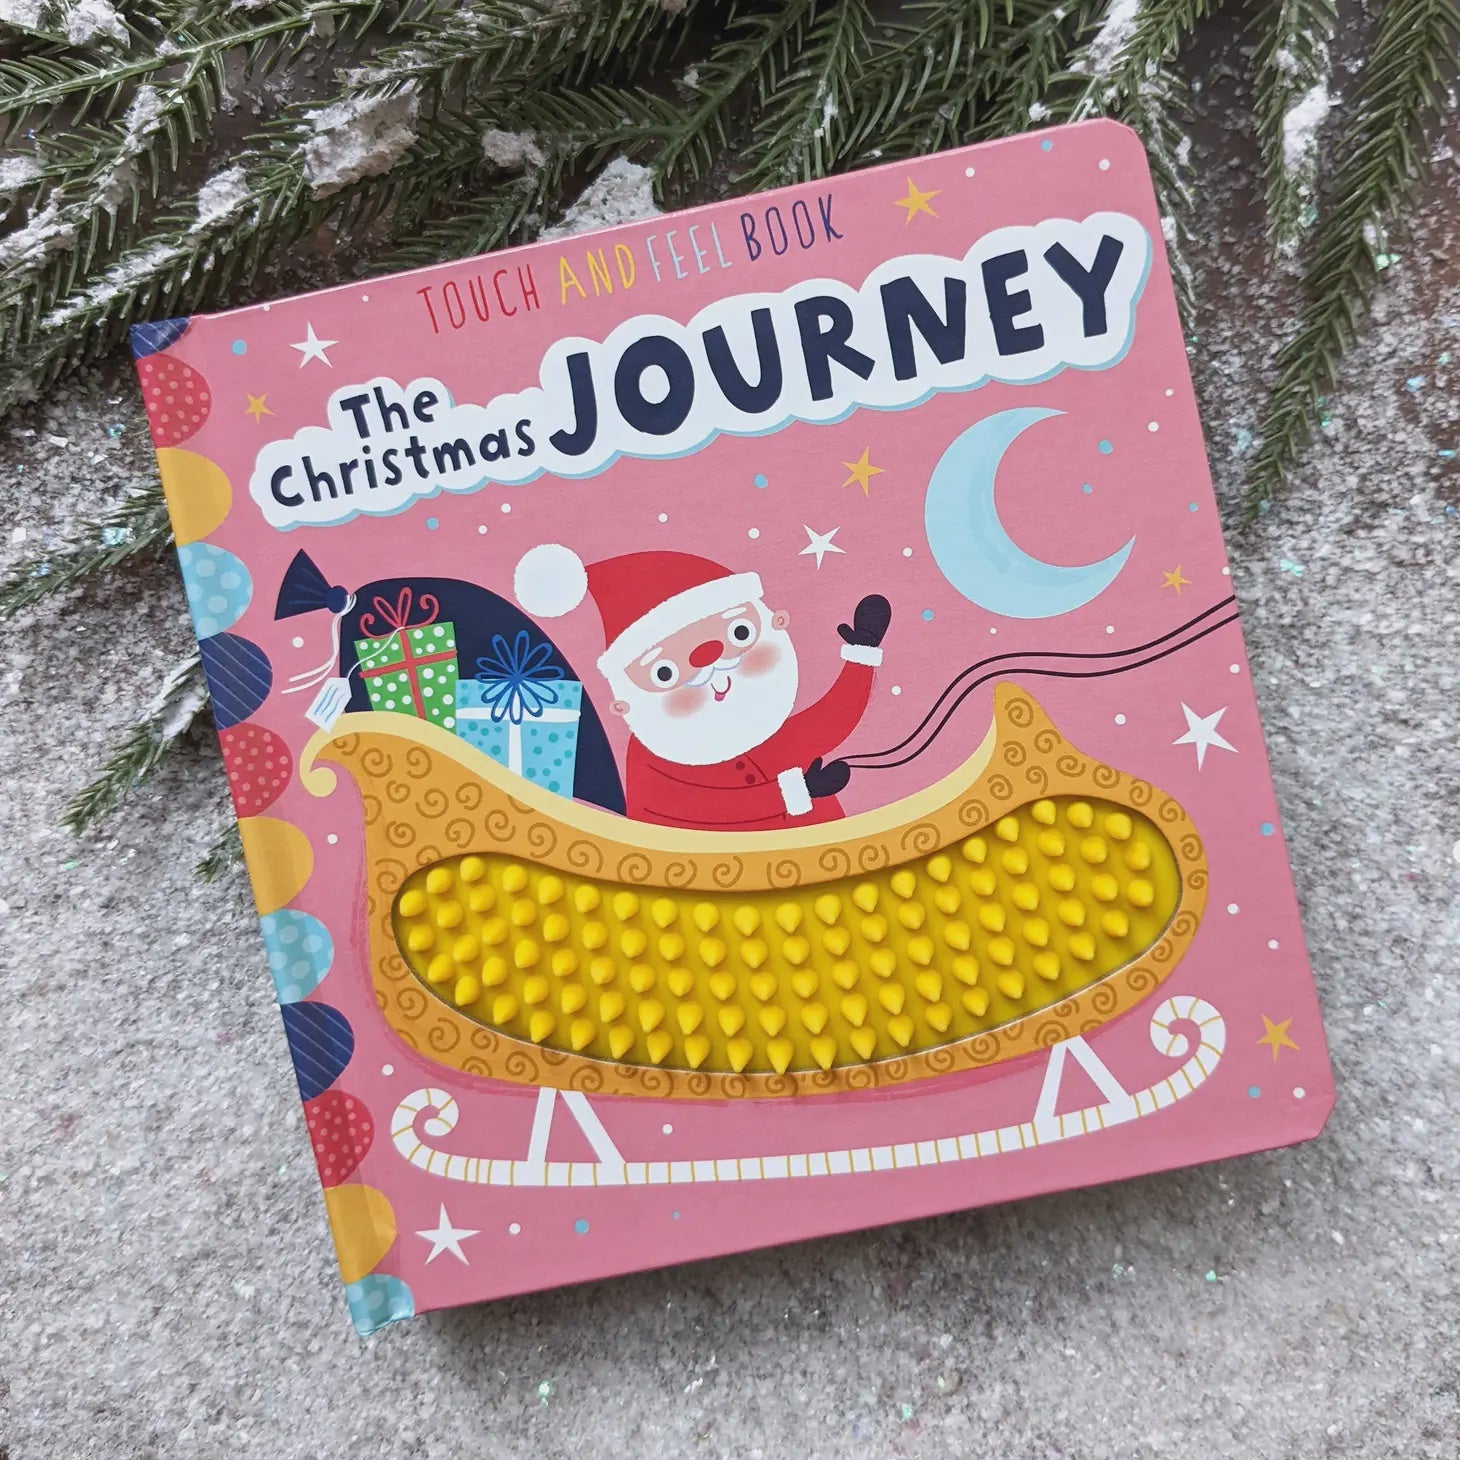 Touch & Feel Book-The Christmas Journey